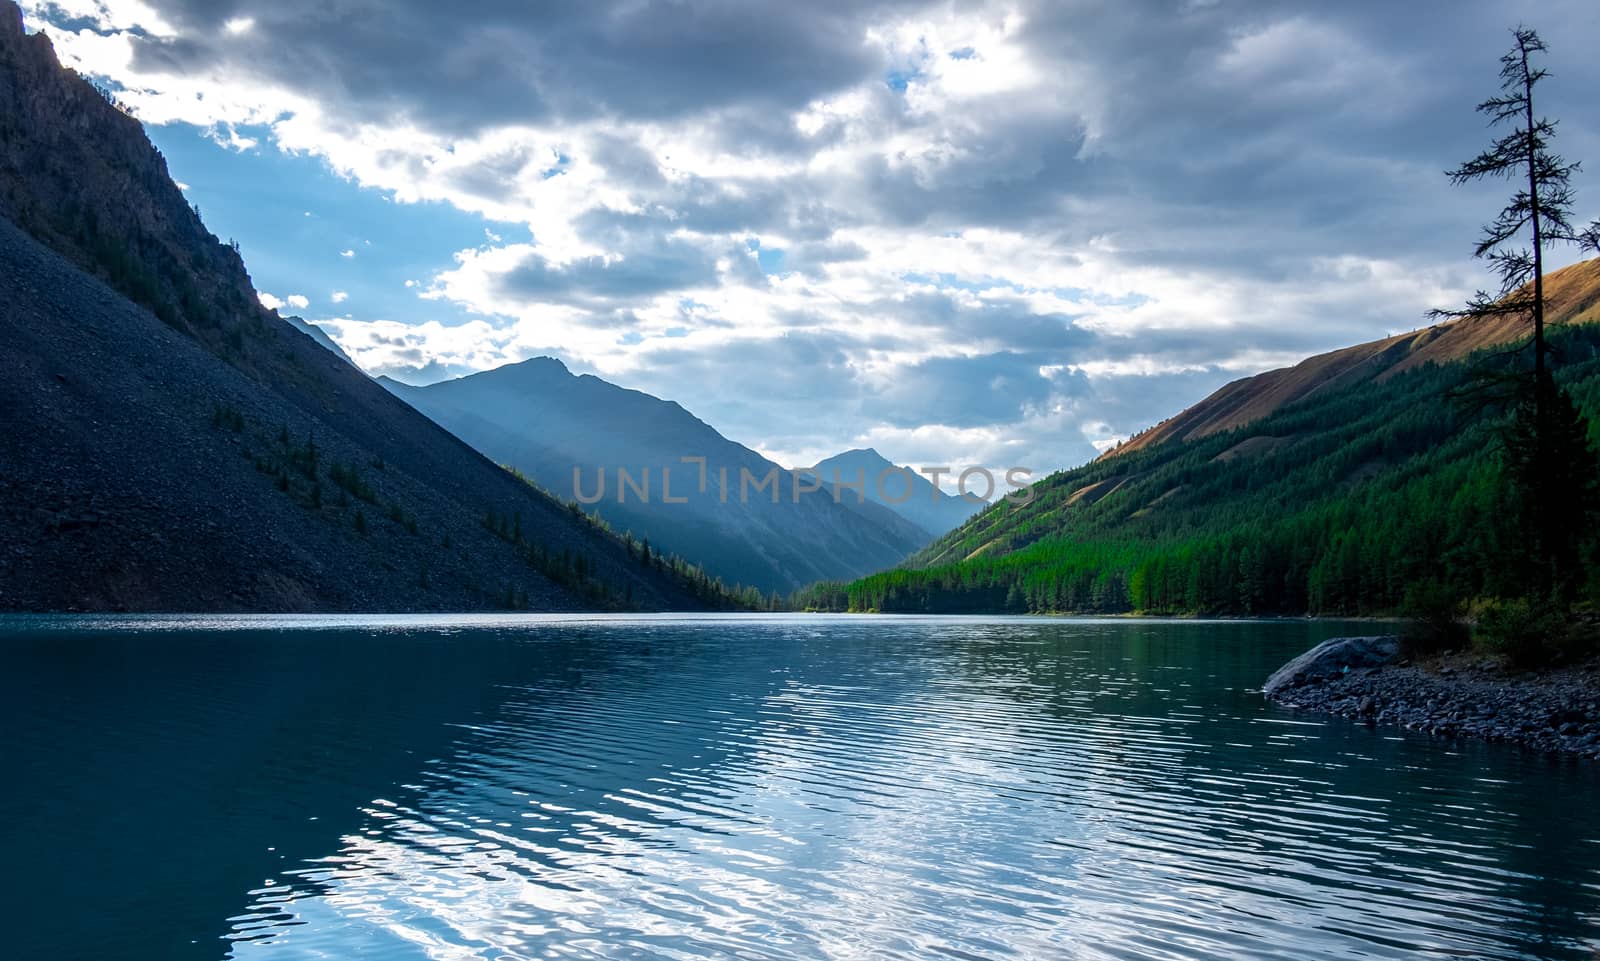 Clouds are reflected in the water of the Shavlinskoye lake in the Altai Republic.